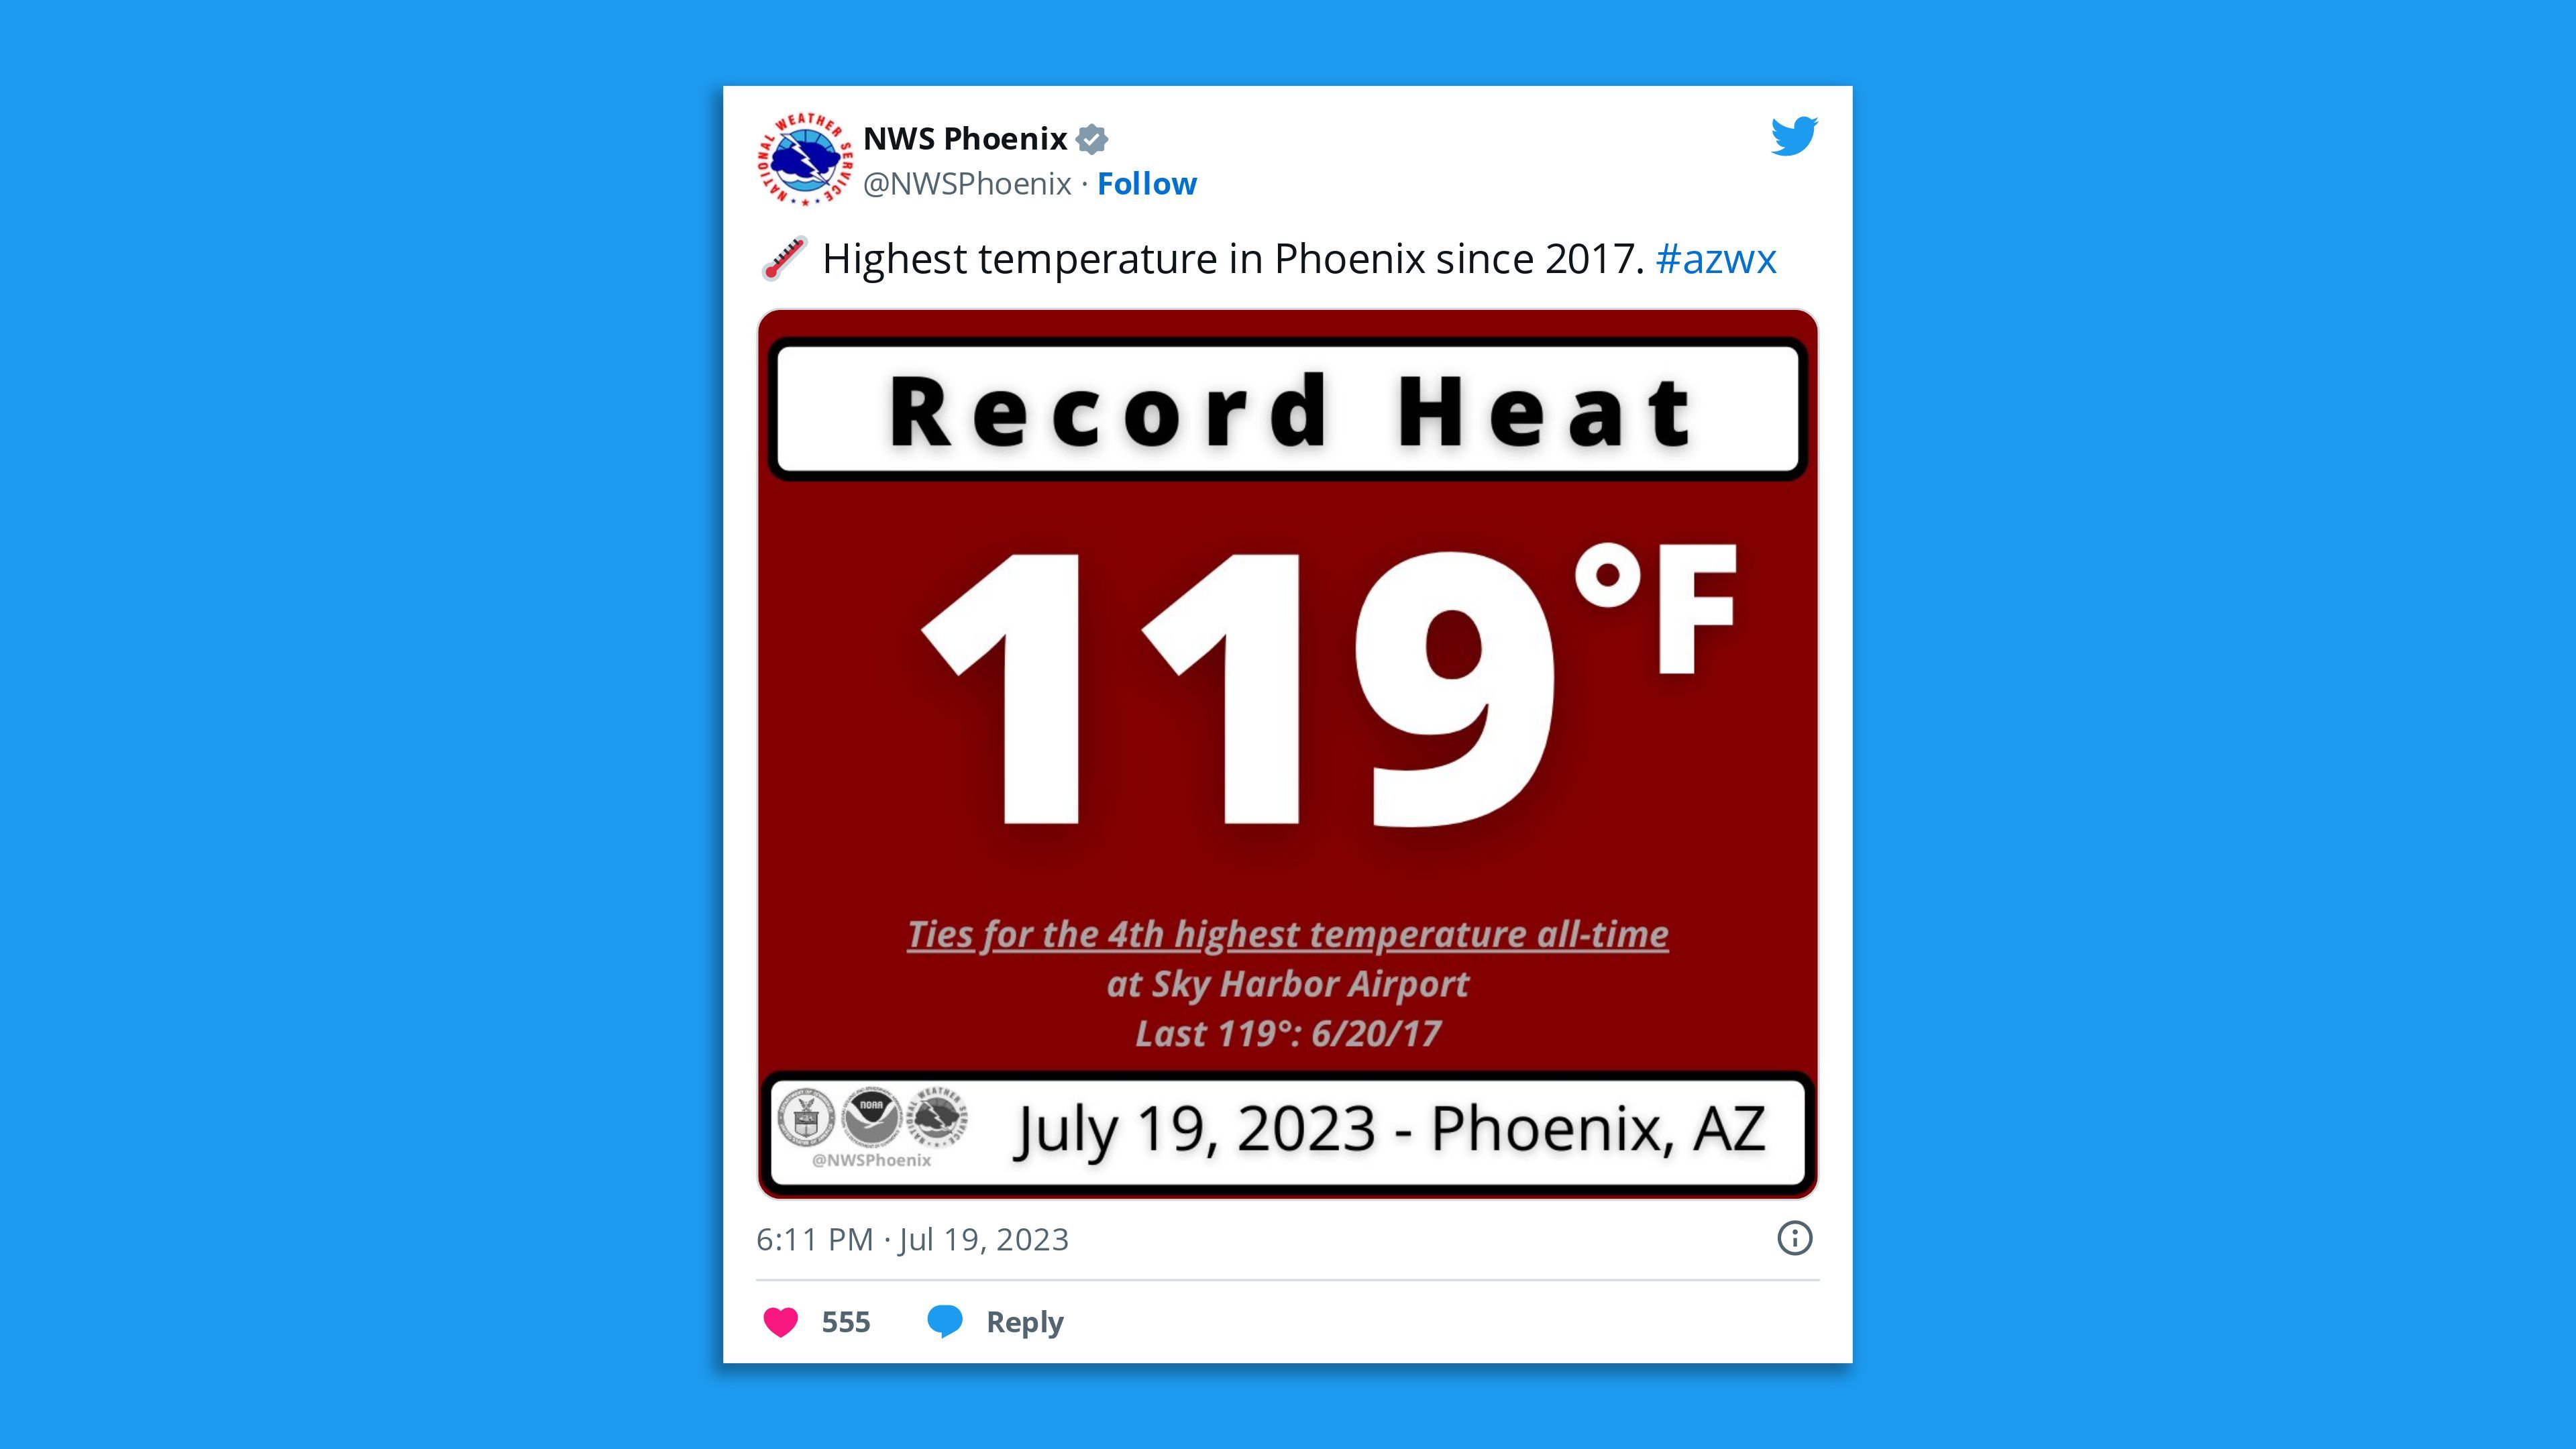 A screenshot of an NWS Phoenix tweet showing an image stating "Record heat 119F, ties for 4th hottest temperature of all time" with the comment "🌡️ Highest temperature in Phoenix since 2017. "